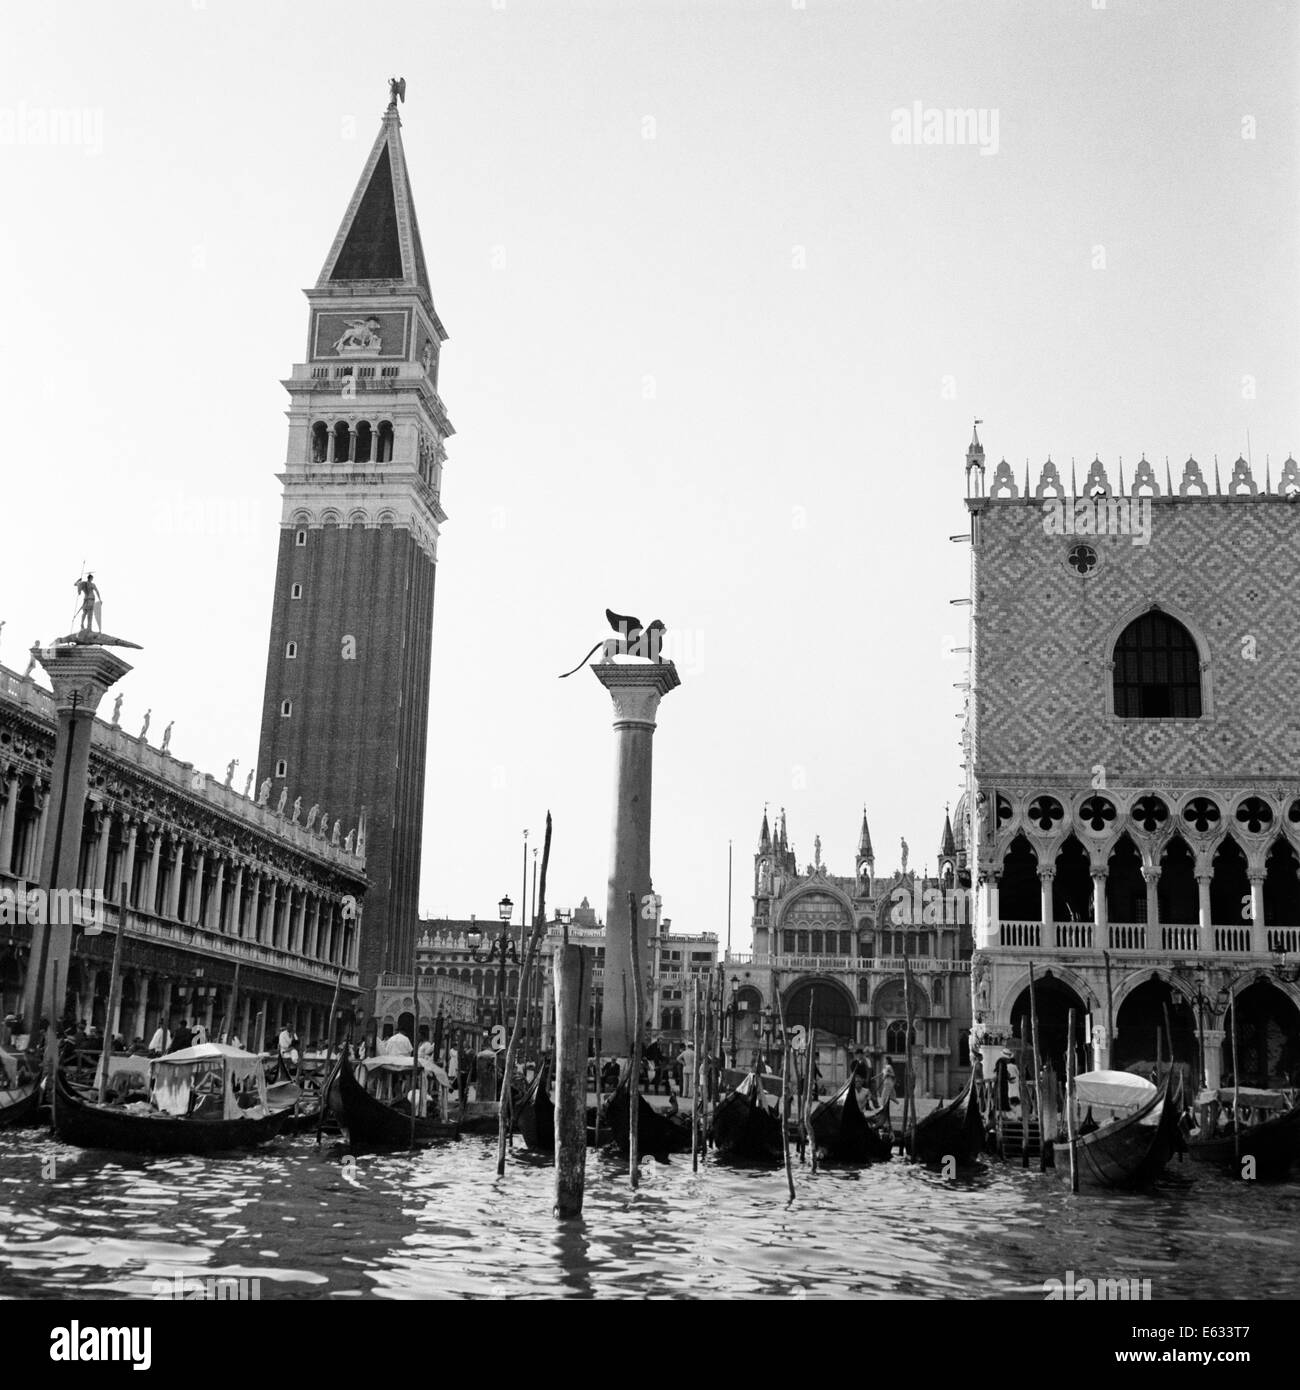 1920s 1930s VENICE ITALY PIAZZA SAN MARCO CAMPANILE TOWER AND WINGED LION STATUE Stock Photo